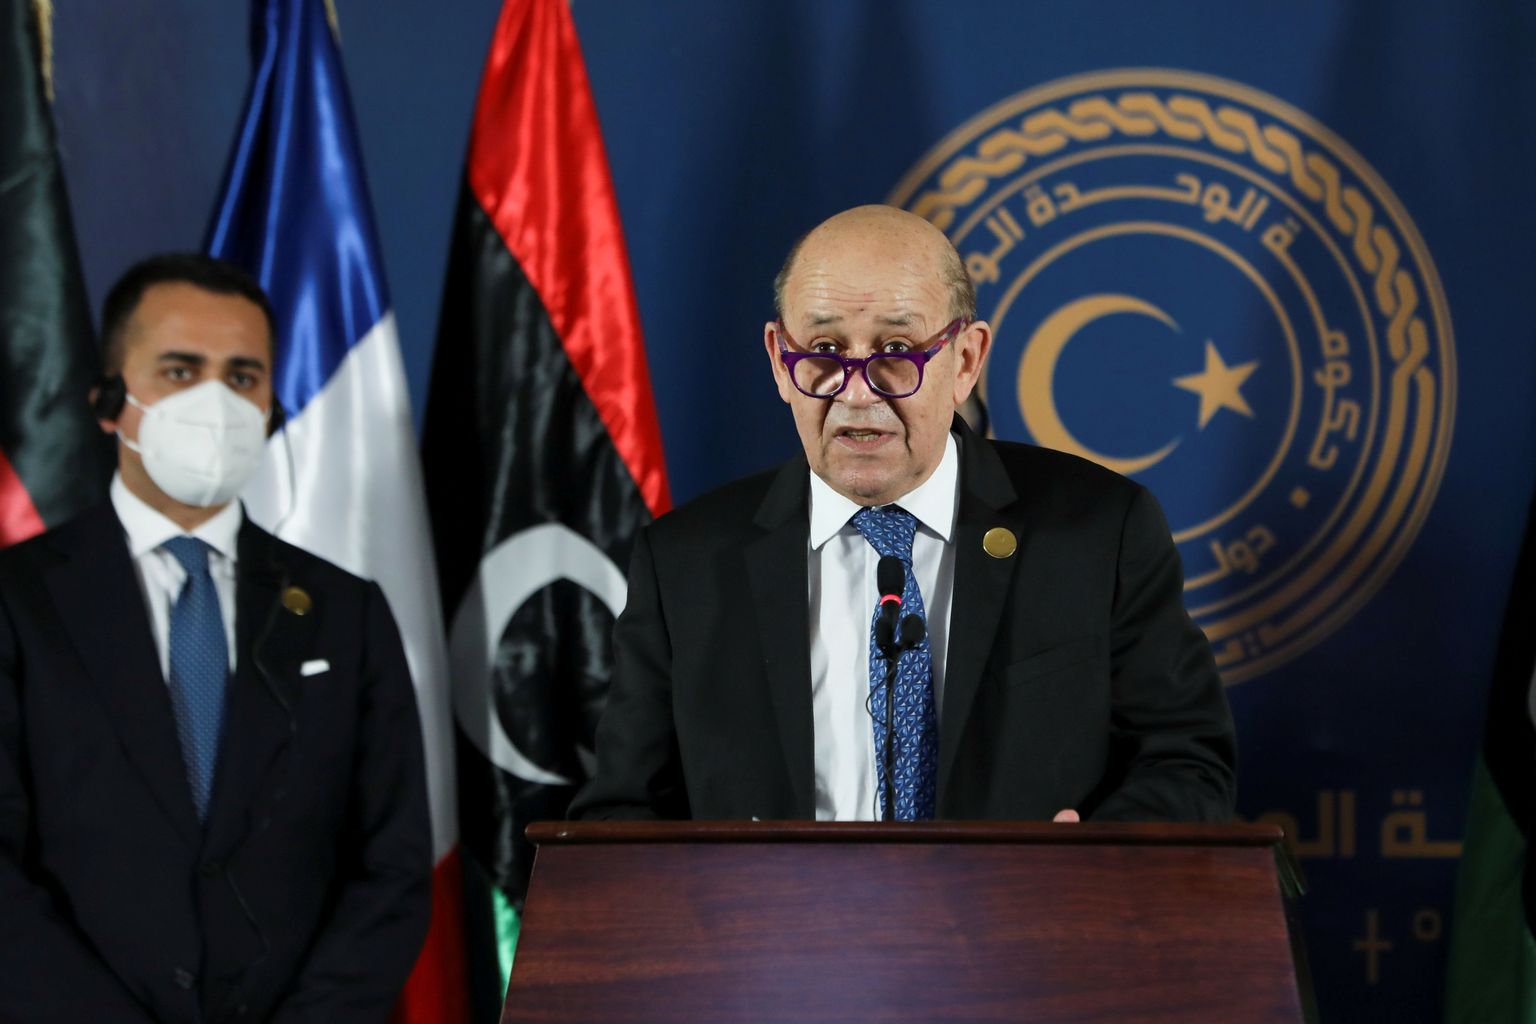 French Foreign Minister Jean-Yves Le Drian speaks as he delivers a joint statement with German Foreign Minister Heiko Maas, Italian Foreign Minister Luigi Di Maio, and Libyan Foreign Minister Najla el-Mangoush, in Tripoli, Libya March 25, 2021. REUTERS/Hazem Ahmed REFILE - CORRECTING ID